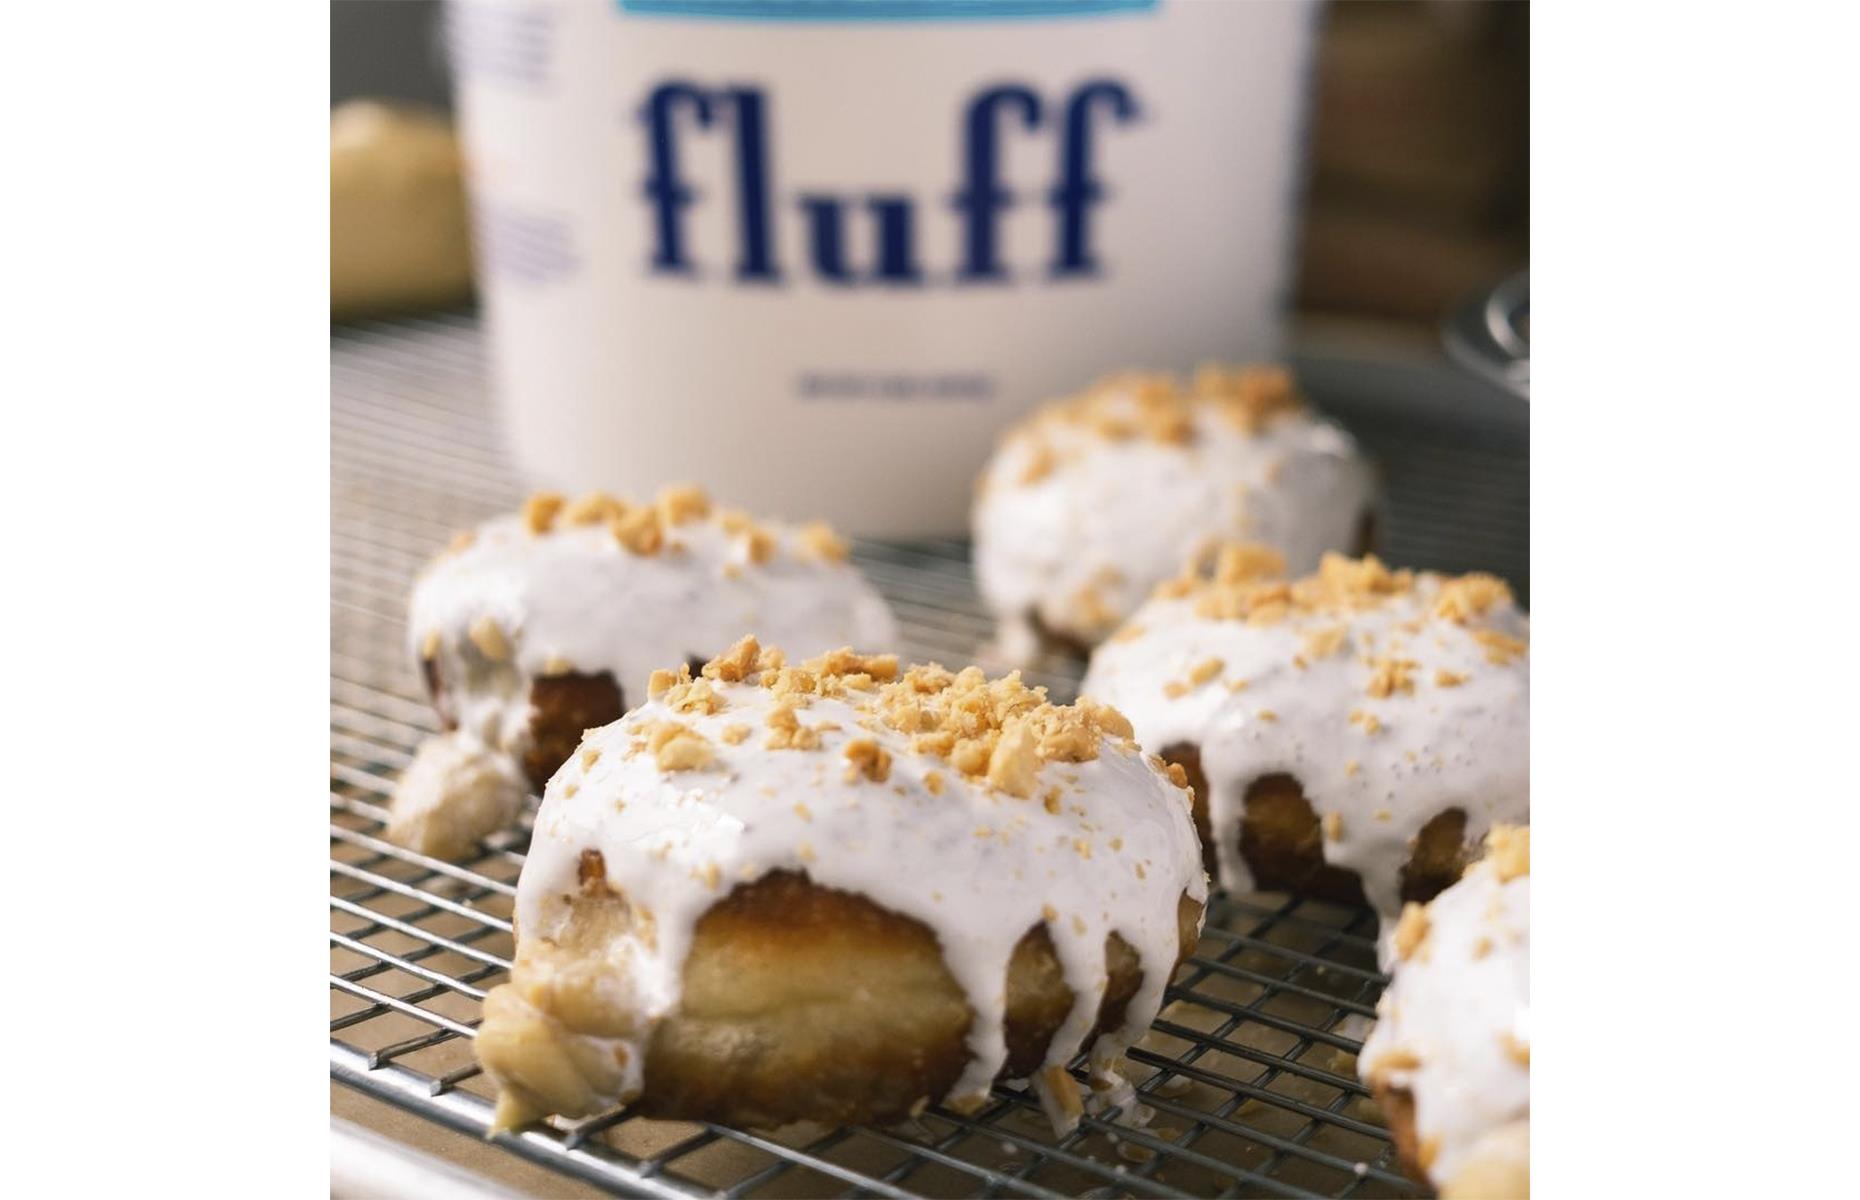 <p>This delicious little donut was created to celebrate the 13th annual <a href="https://www.flufffestival.com/">What the Fluff Festival</a> – a nonprofit event that brings people together with a love of marshmallow fluff. <a href="https://www.unionsquaredonuts.com/">Union Square Donuts</a>, which has locations in Boston, Brookline and Somerville, filled the Fluffernutter with peanut butter pastry cream, dipped it in gooey marshmallow and topped it with salted and roasted peanuts. It proved hugely popular (of course) so tends to be released fairly regularly as a limited-edition treat.</p>